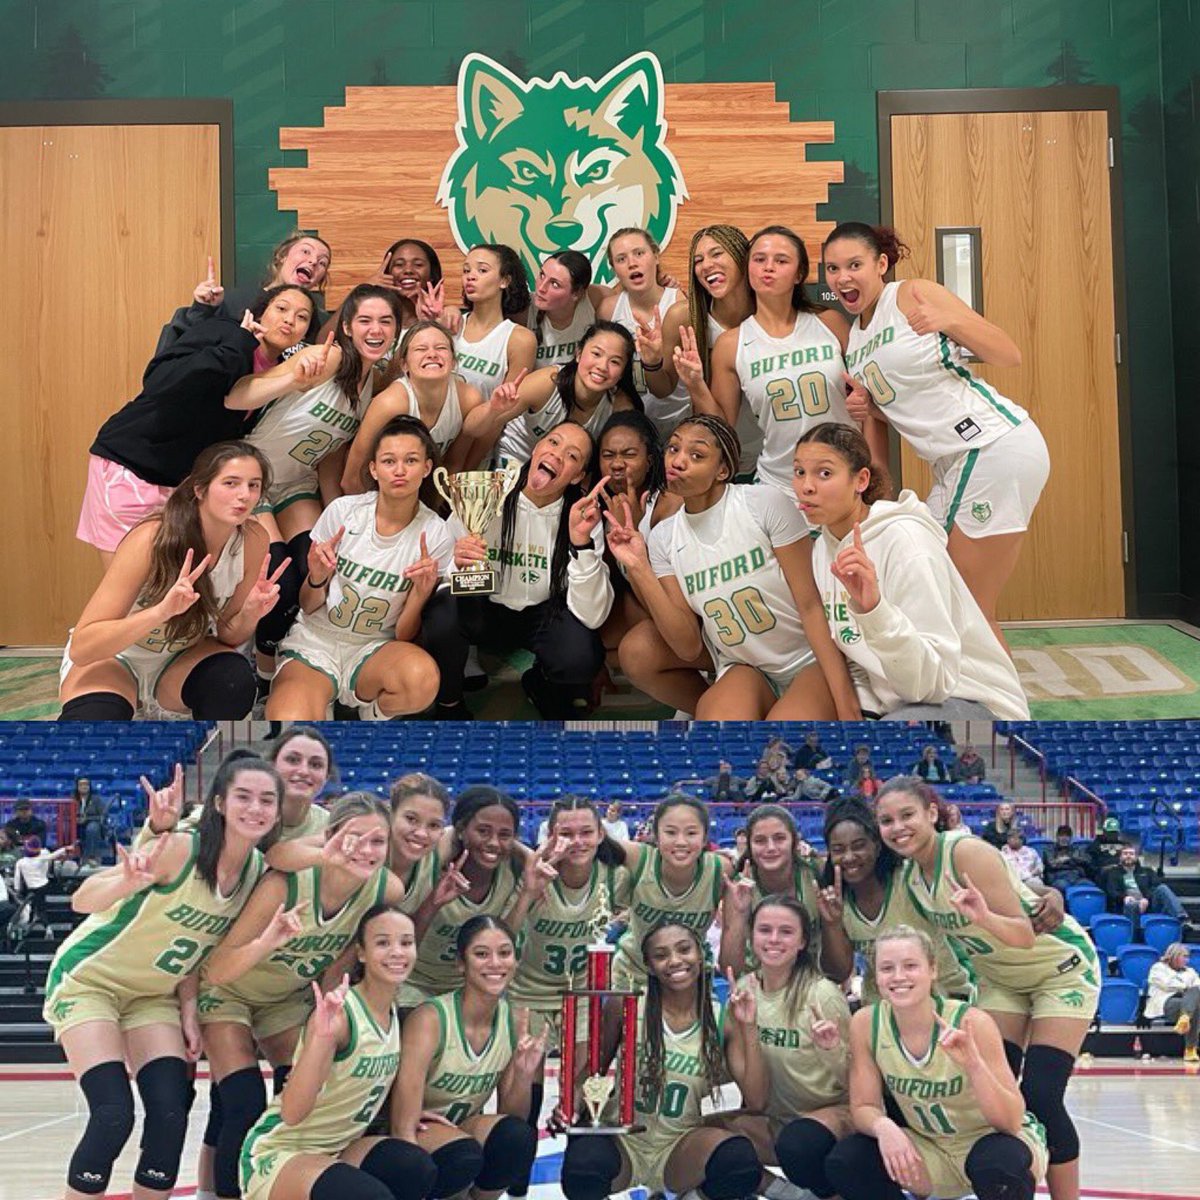 Junior year ✅ Senior year loading….the memories will be treasured..ready to make this final run with the kelly and gold💪🏾🏀@Buford_WBB #culturewins #runandhunt #thefinalrun
#class2024